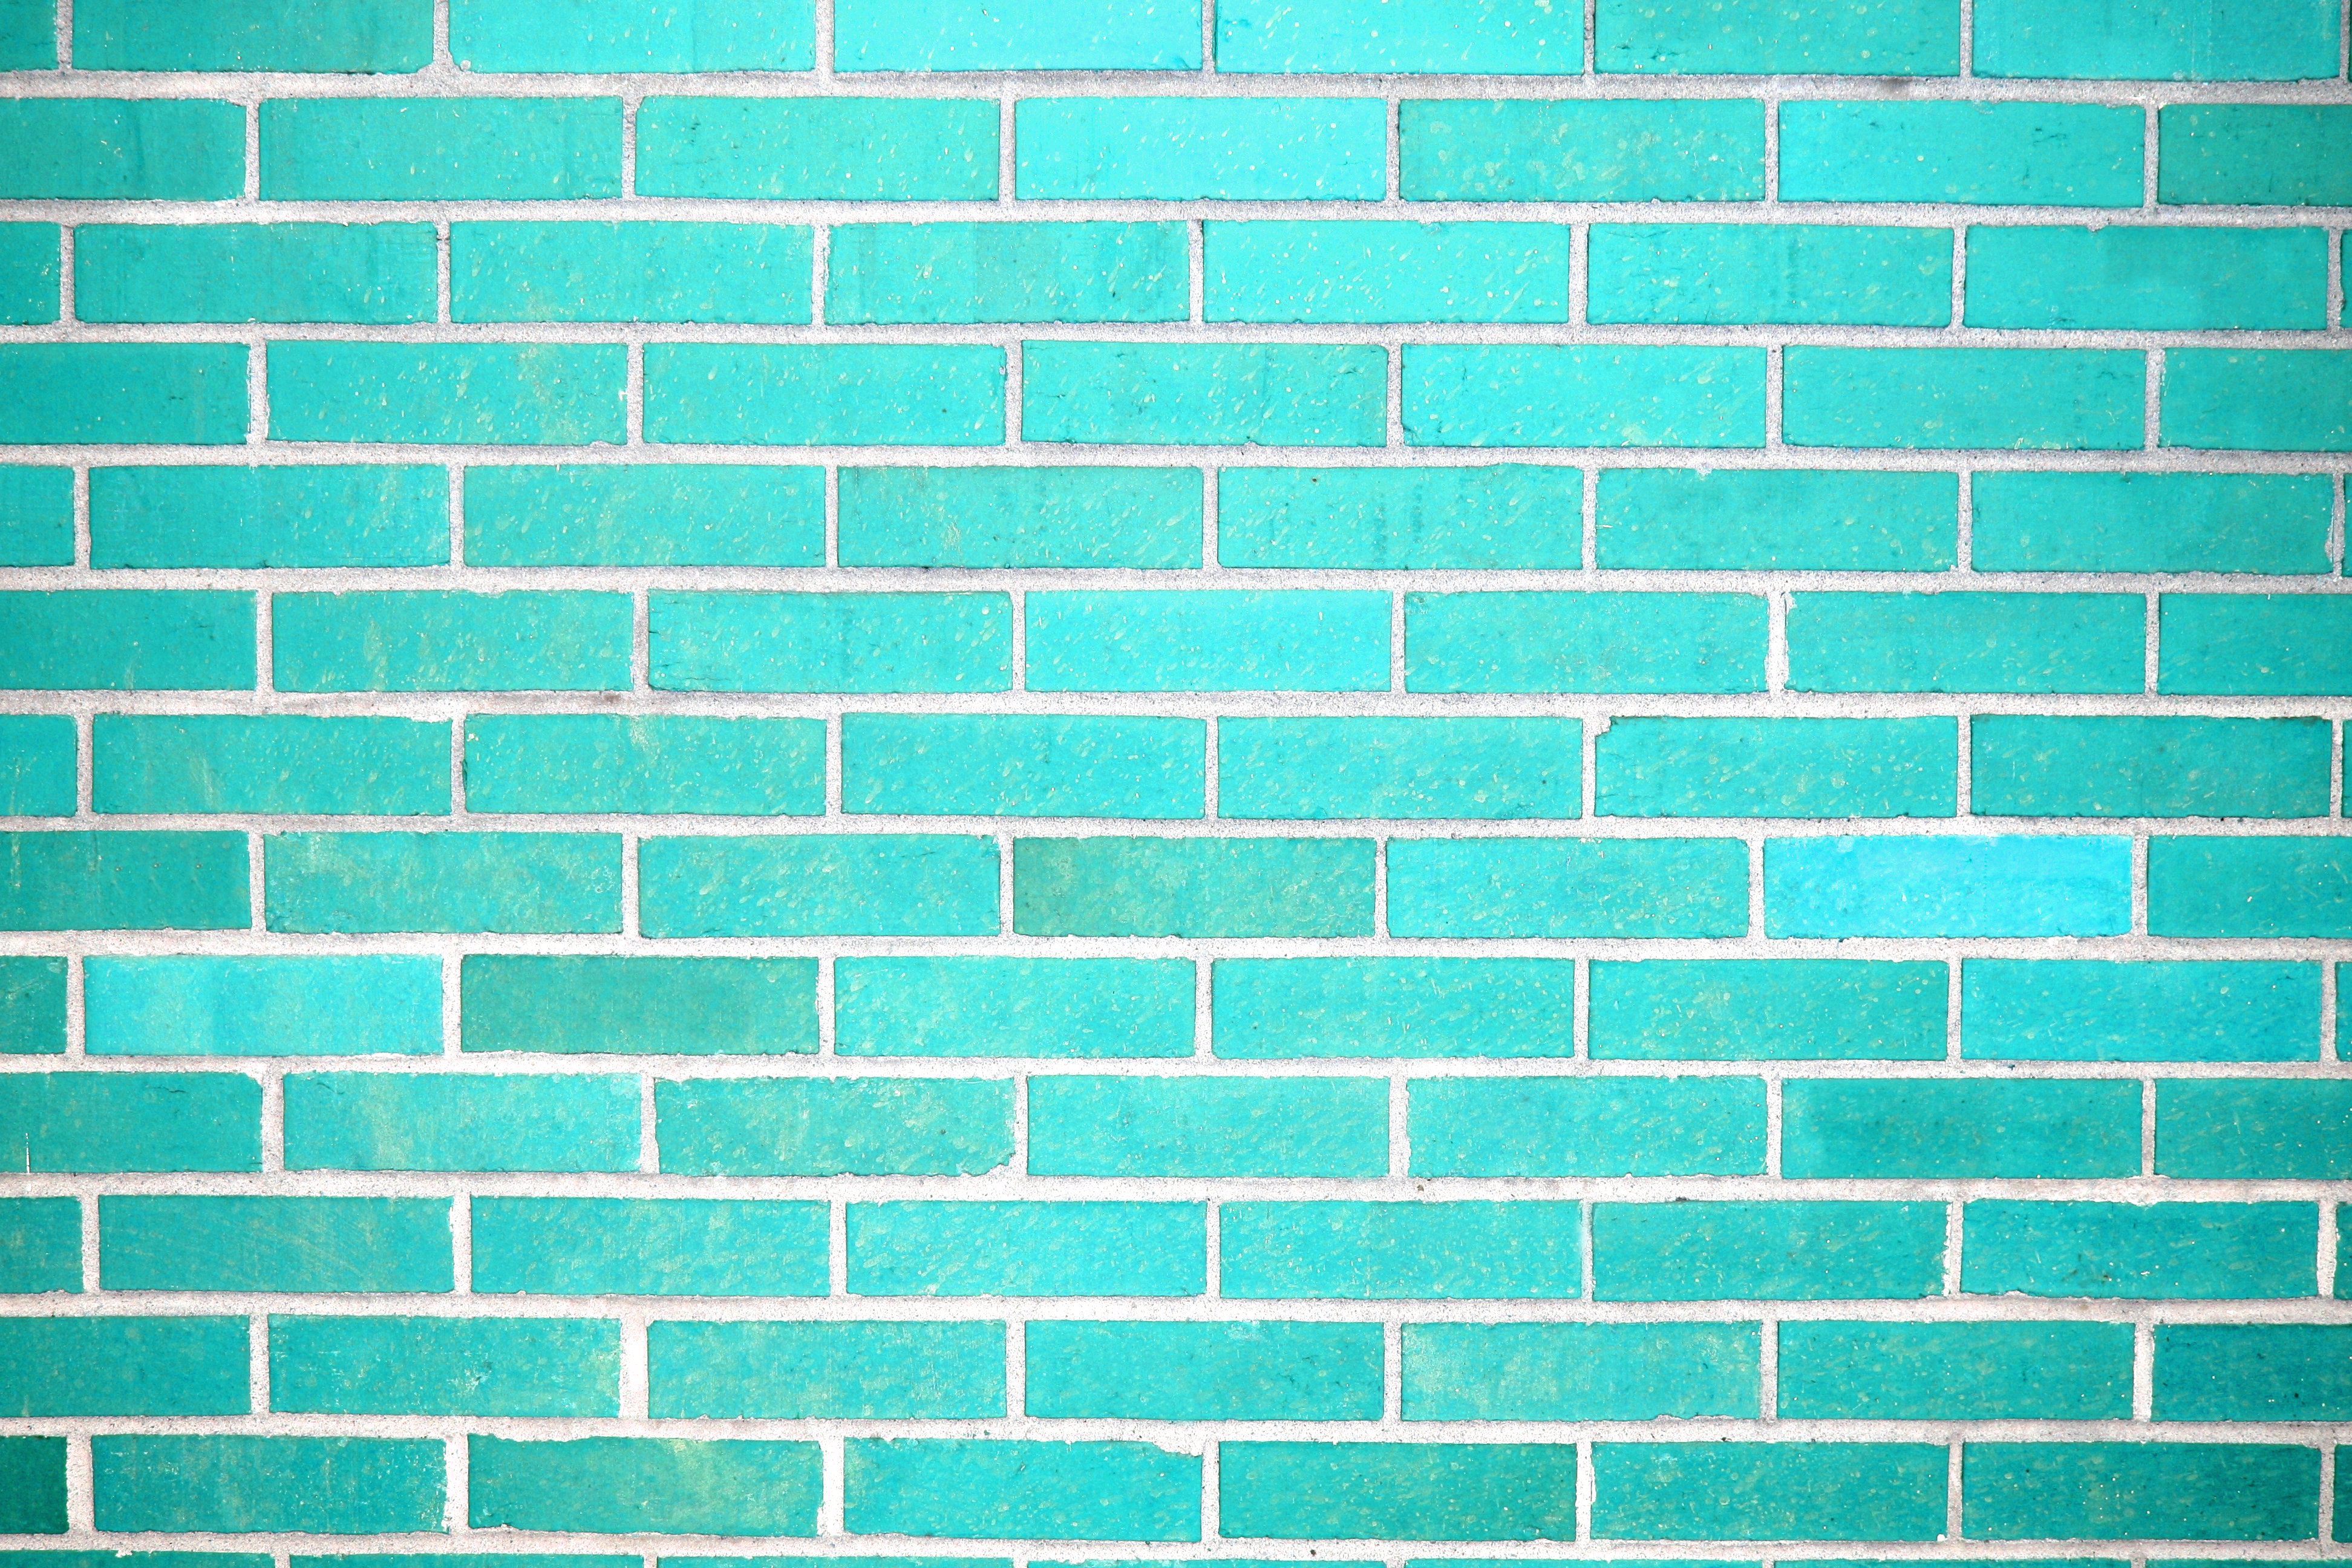 Textured Faux Brick Clipart - Backgrounds Teal - HD Wallpaper 